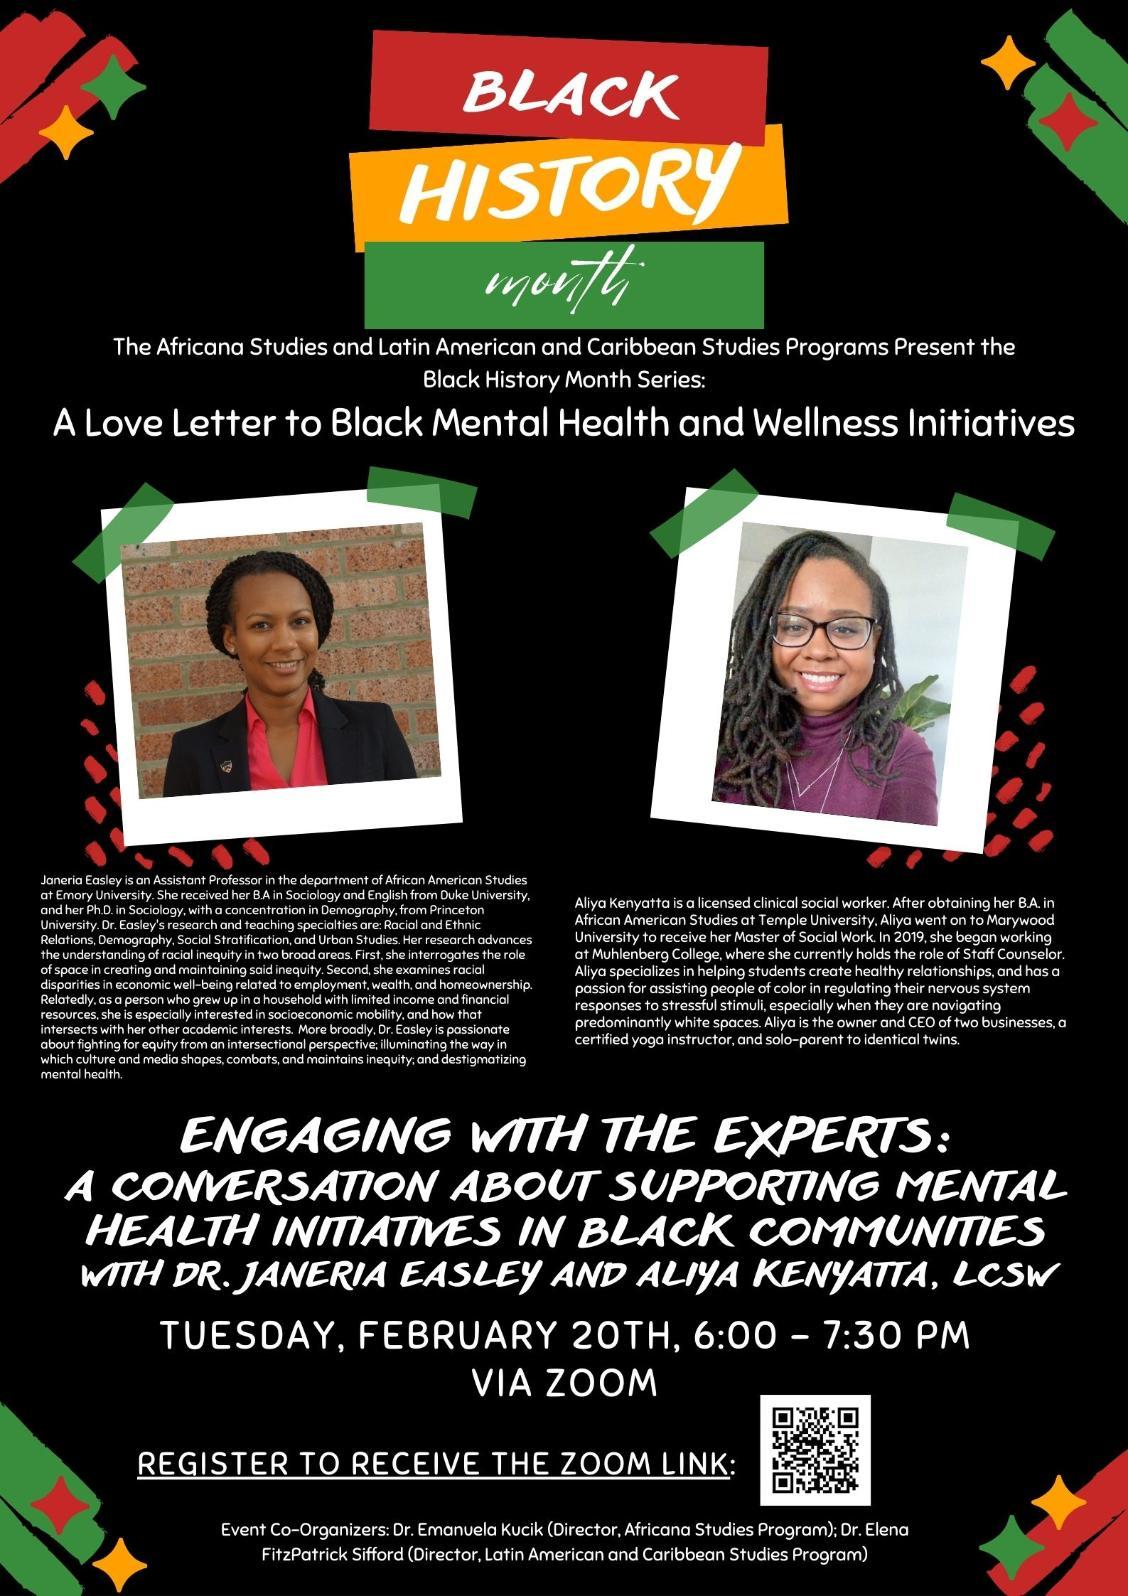 poster advertising supporting mental health initiatives in black communities with registration link: https://form.jotform.com/240354698397976